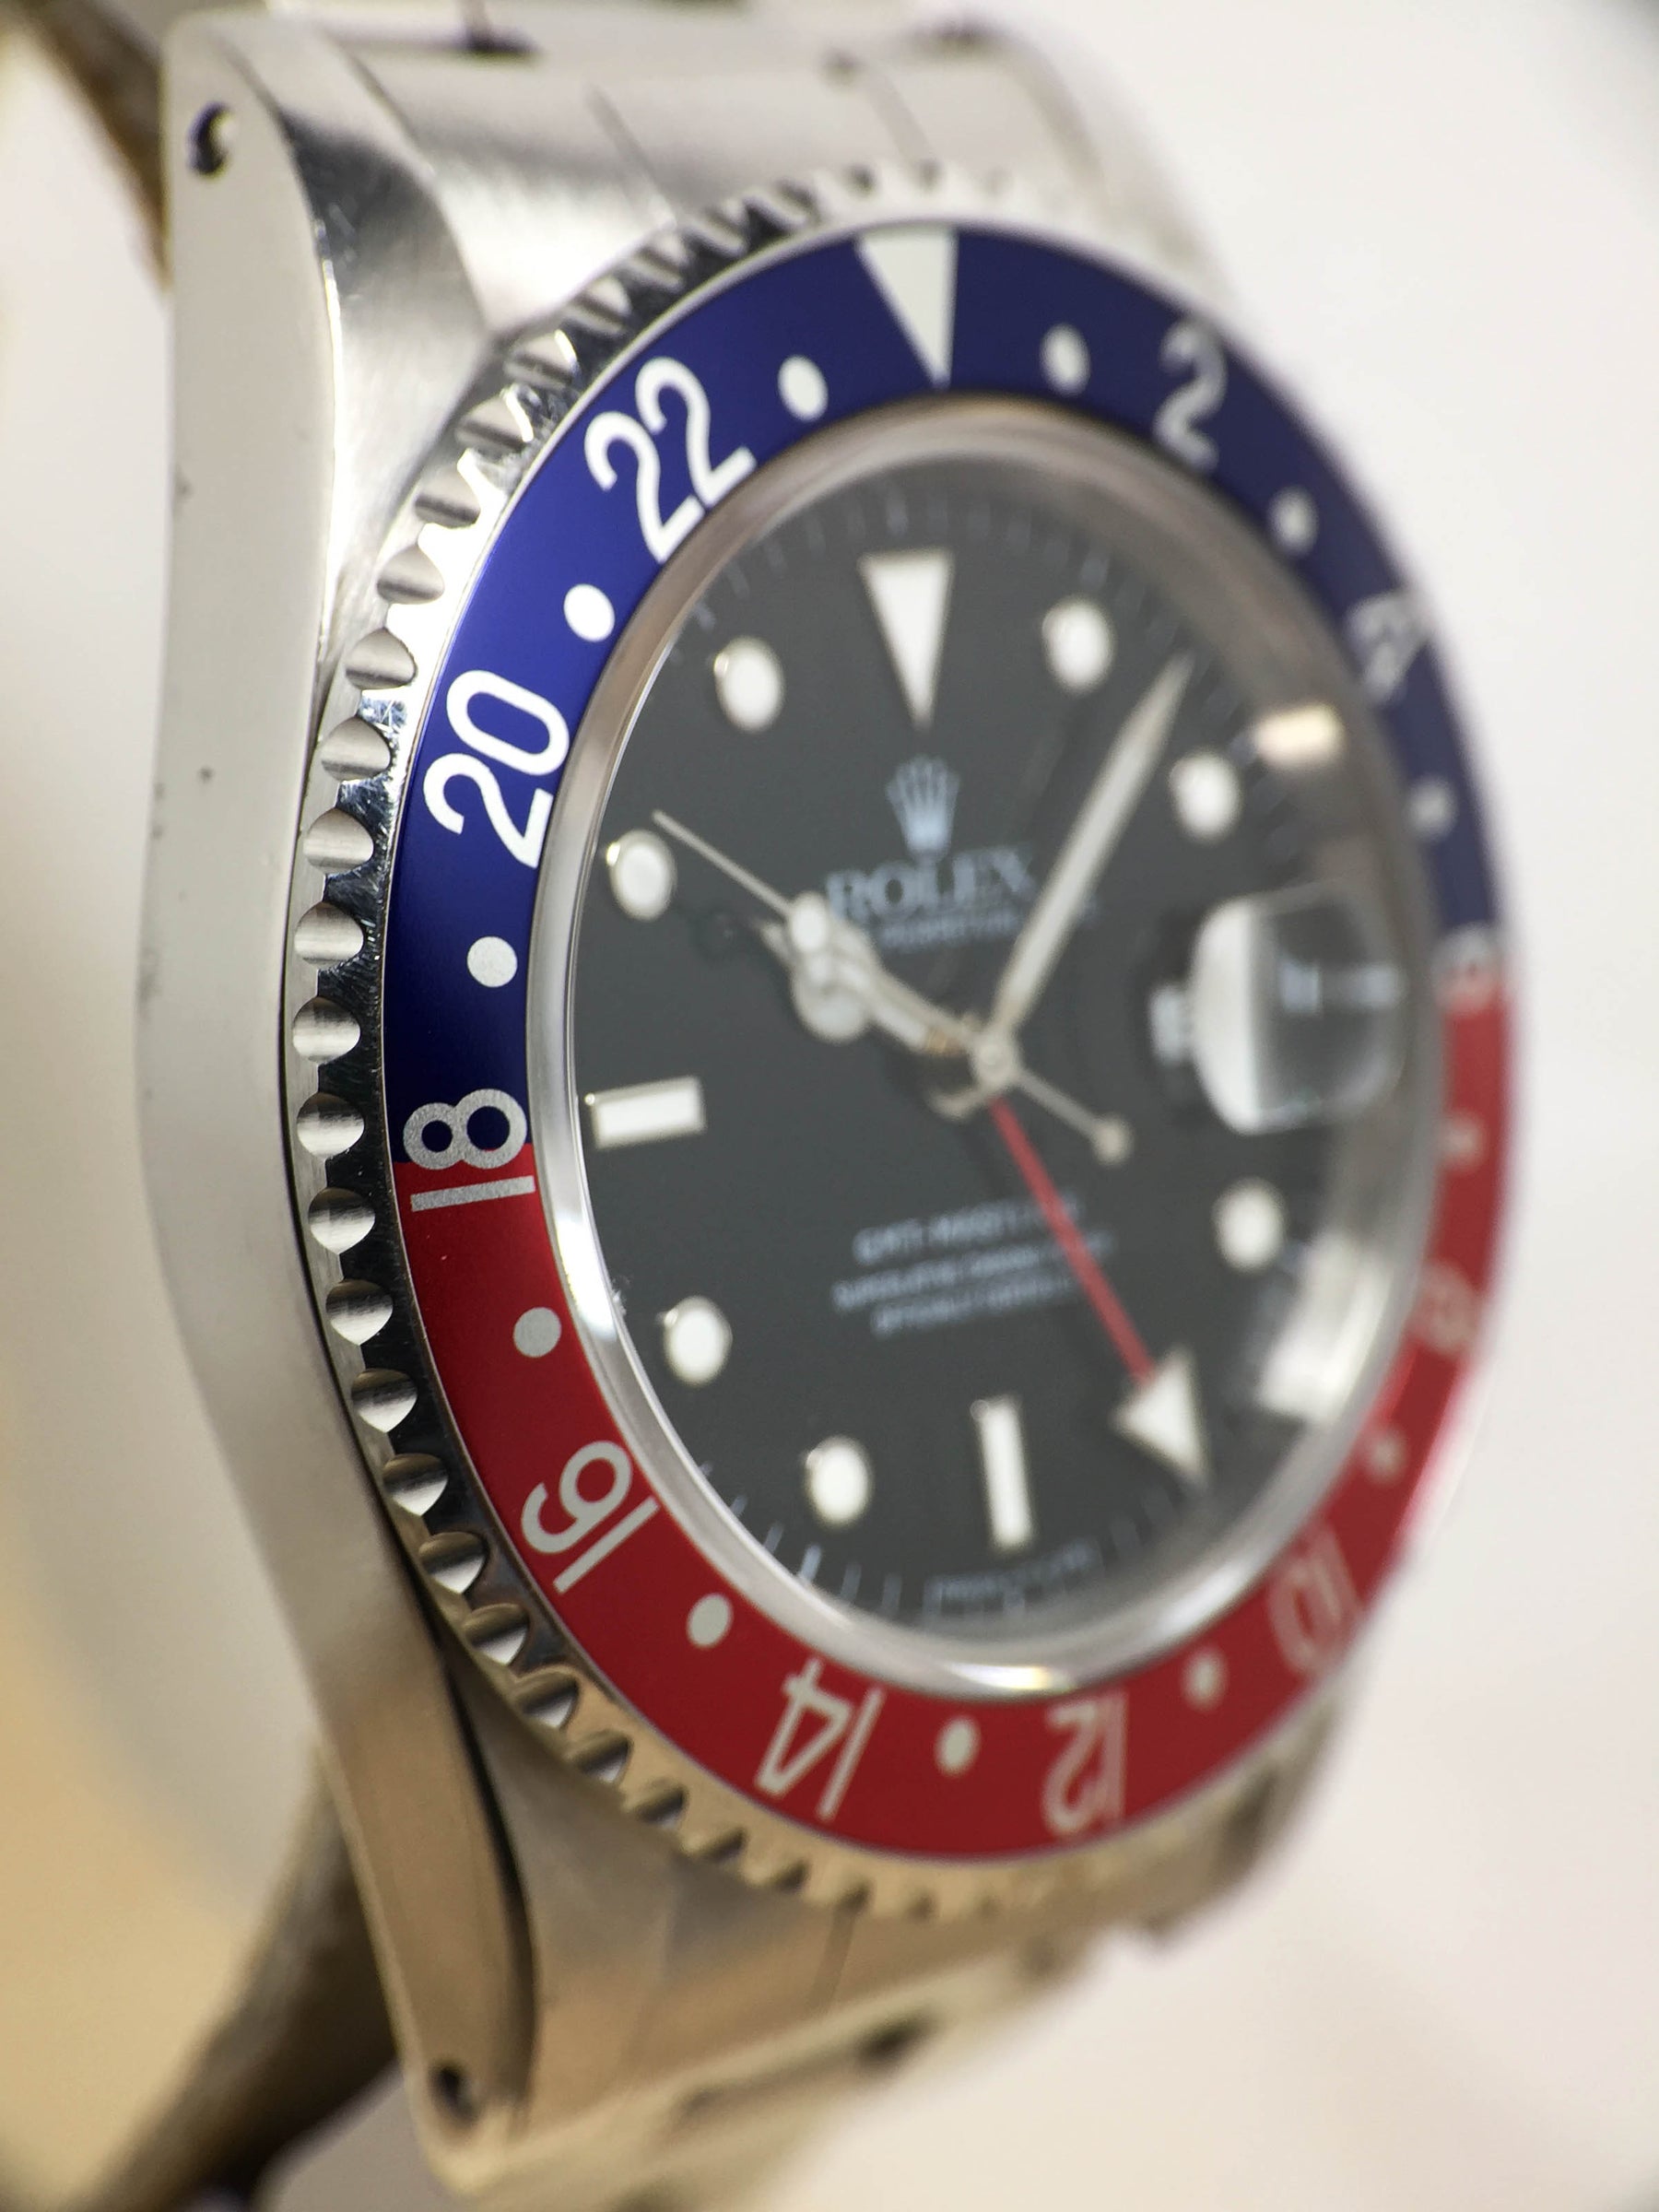 1993 Rolex GMT Master II Ref. 16710 (with Papers)